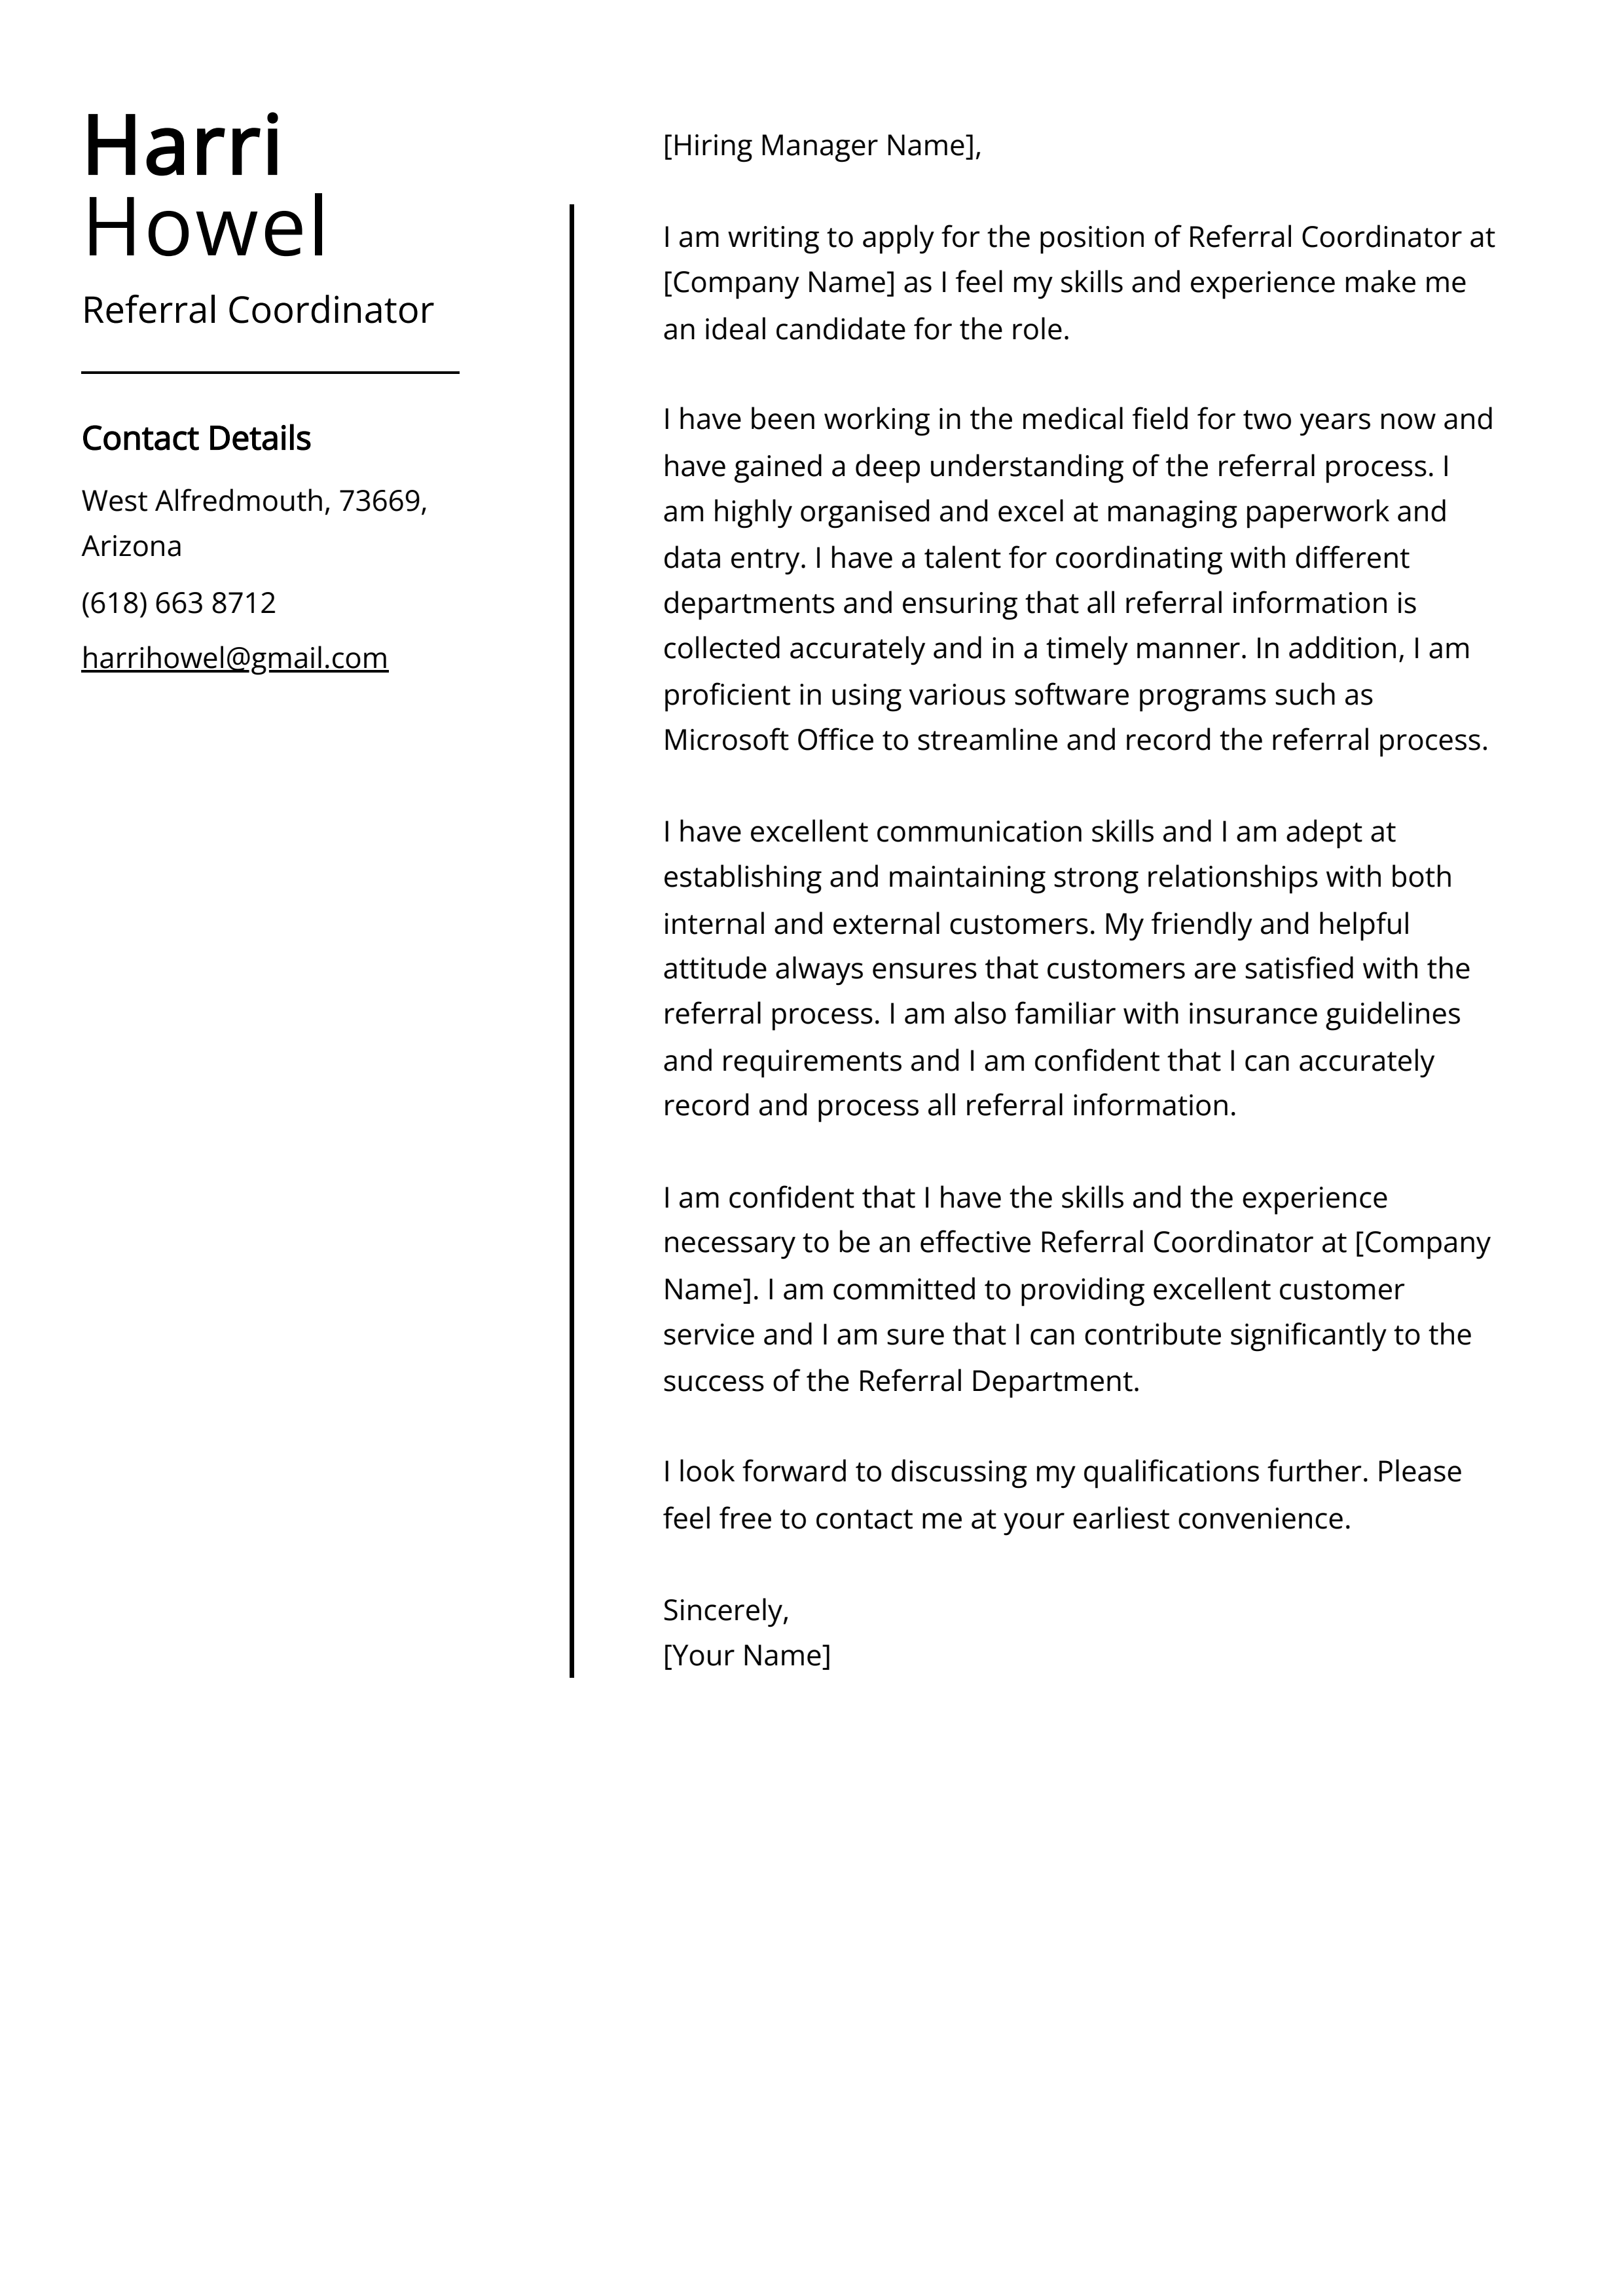 Referral Coordinator Cover Letter Example